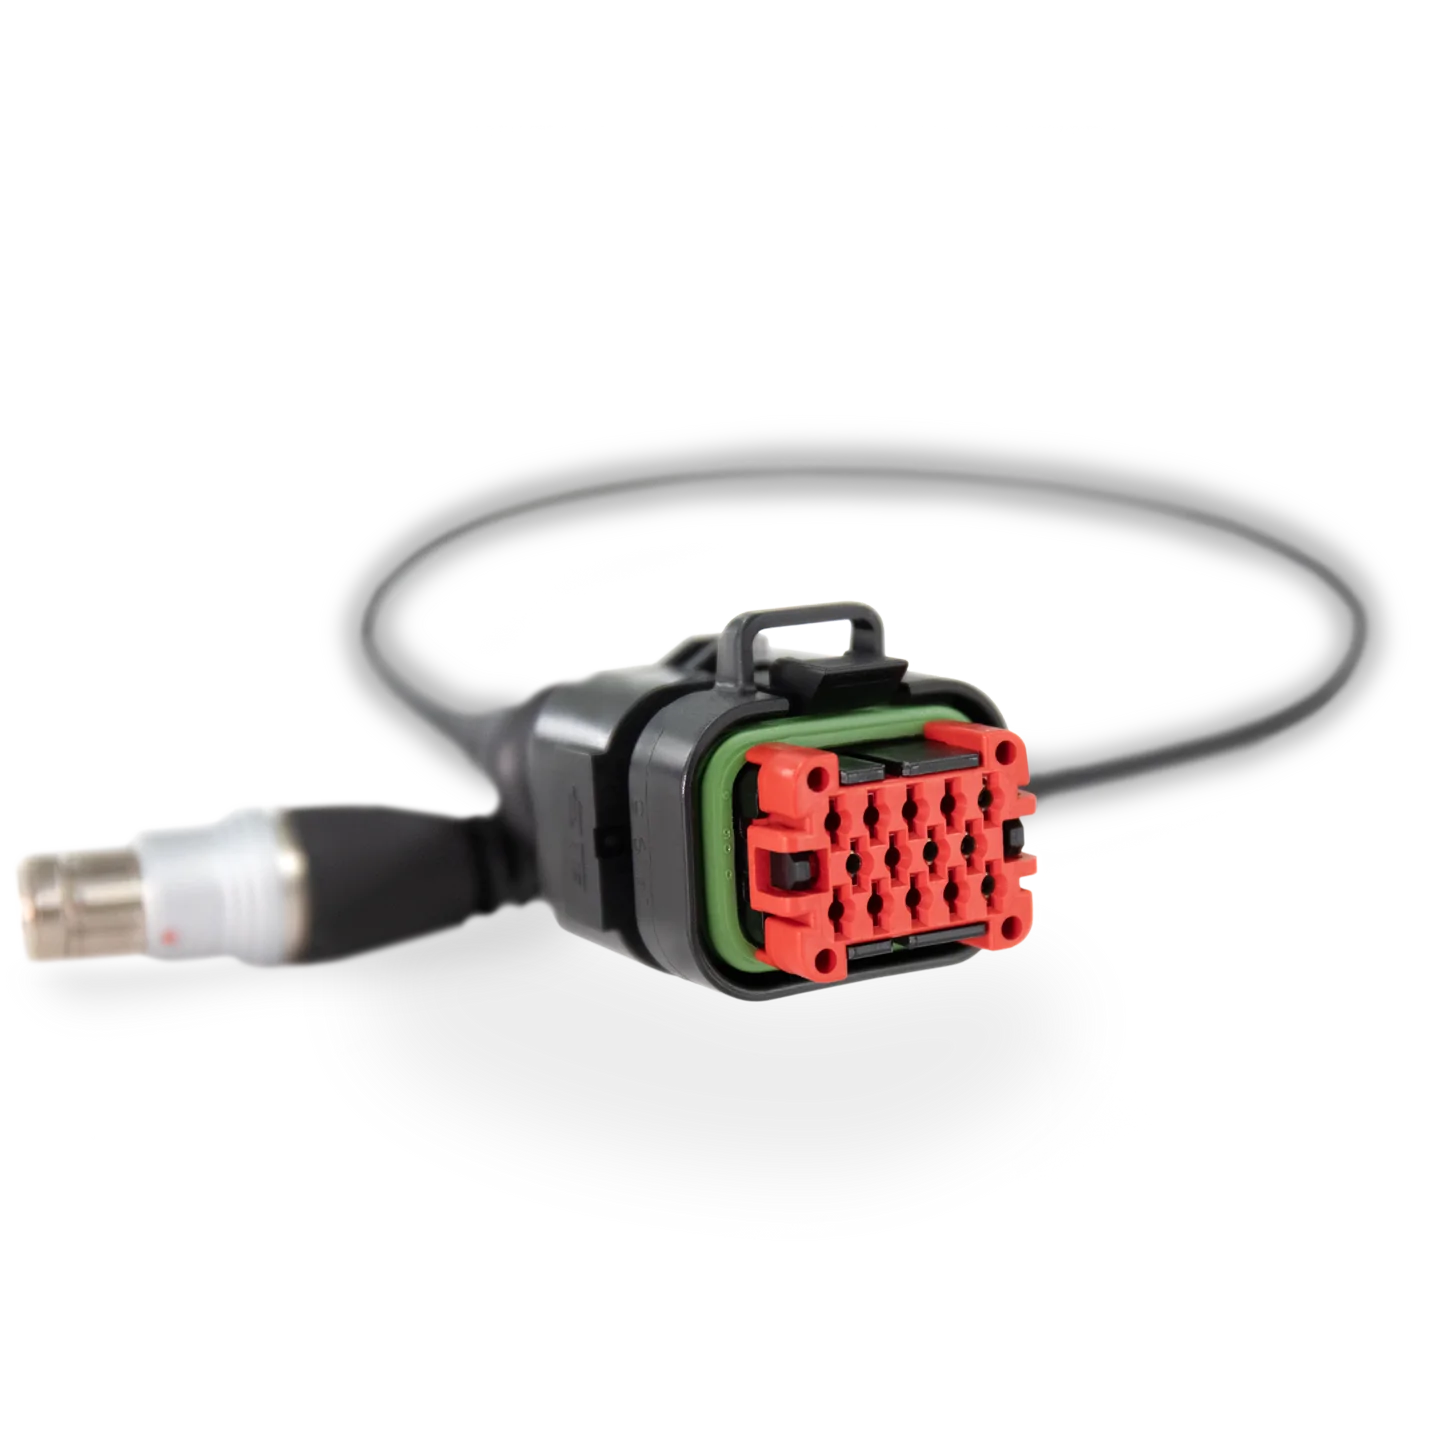 Lift Fischer Charger Cable (5-Pin)